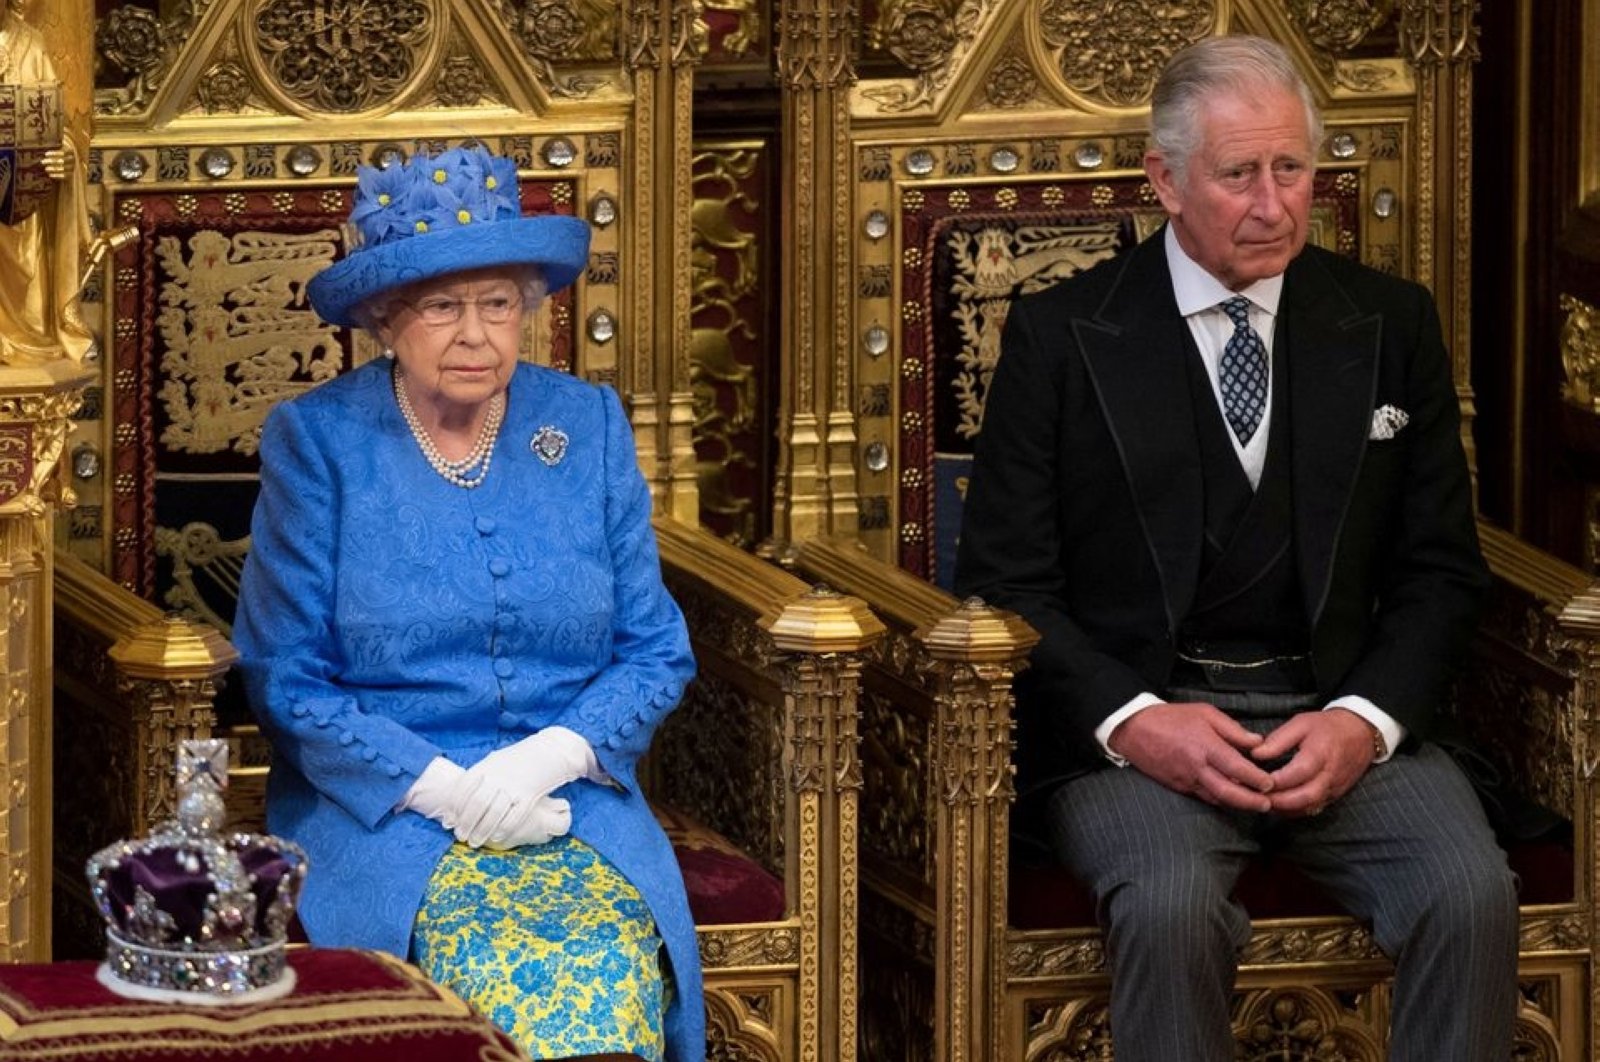 Charles' succession stirs Caribbean calls to remove monarch as head of state